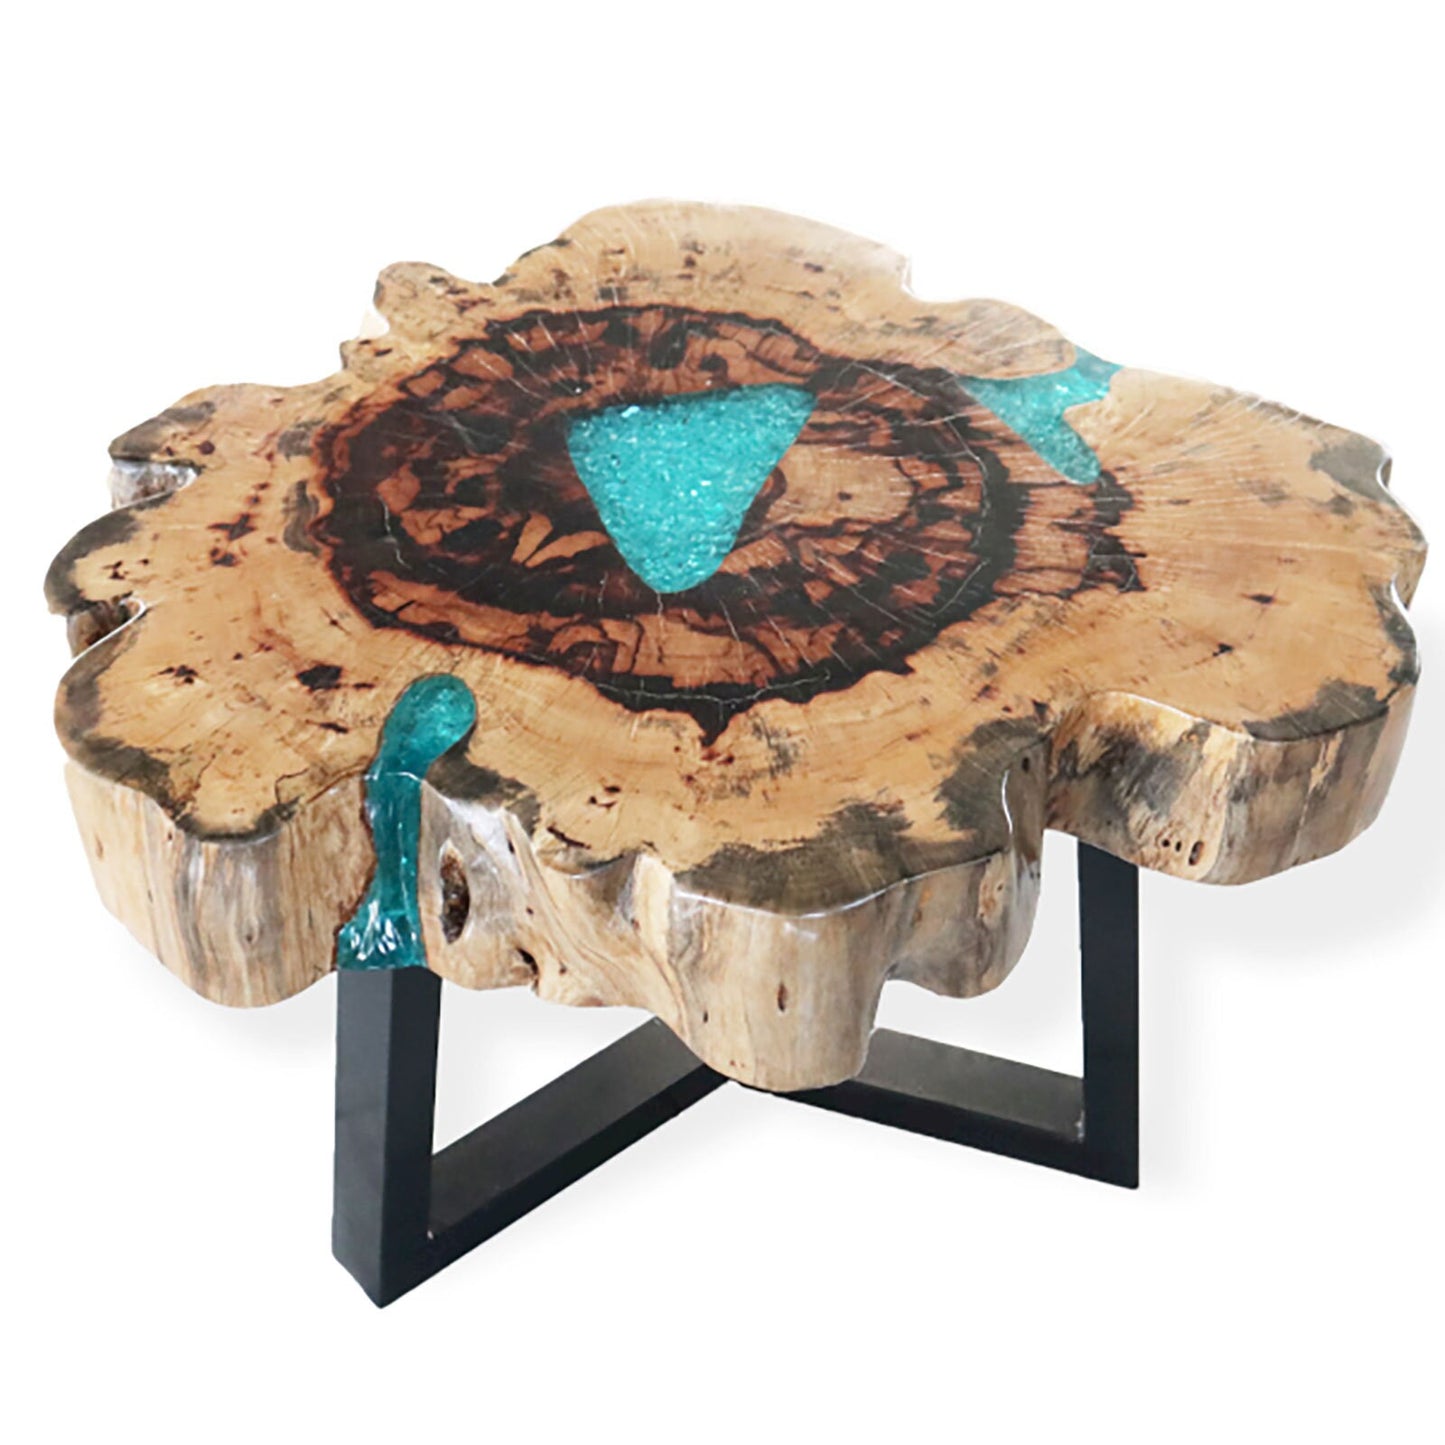 Tamarind wood and Resin Coffee Table-aqua- hand-made, recycled, unique- 46x77 (cm) x 10cm depth Etsy